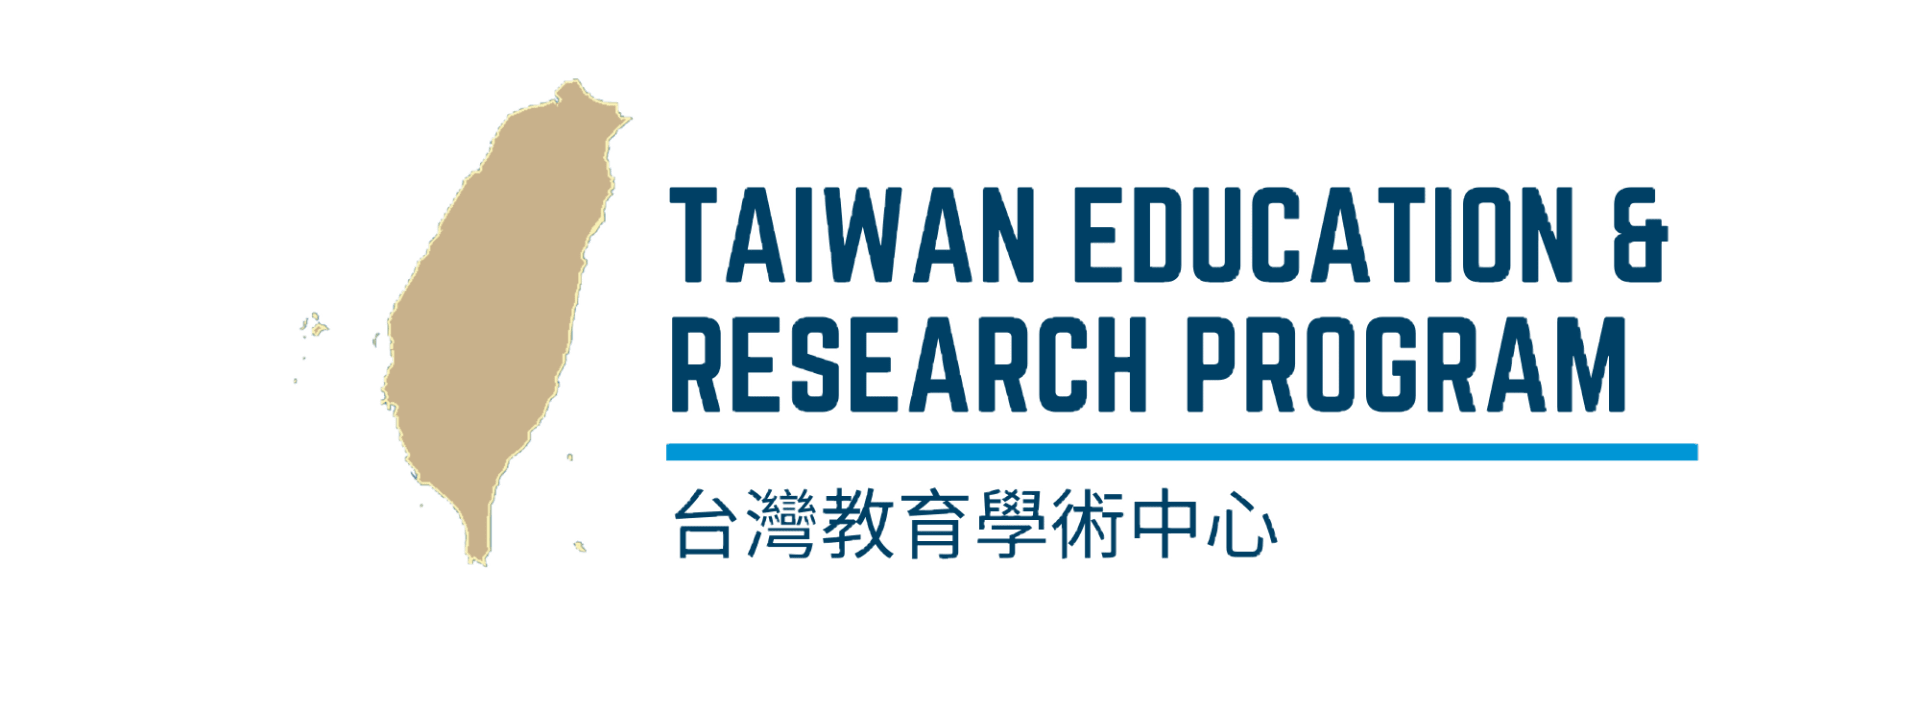 logo of the Taiwan Education and Research Program